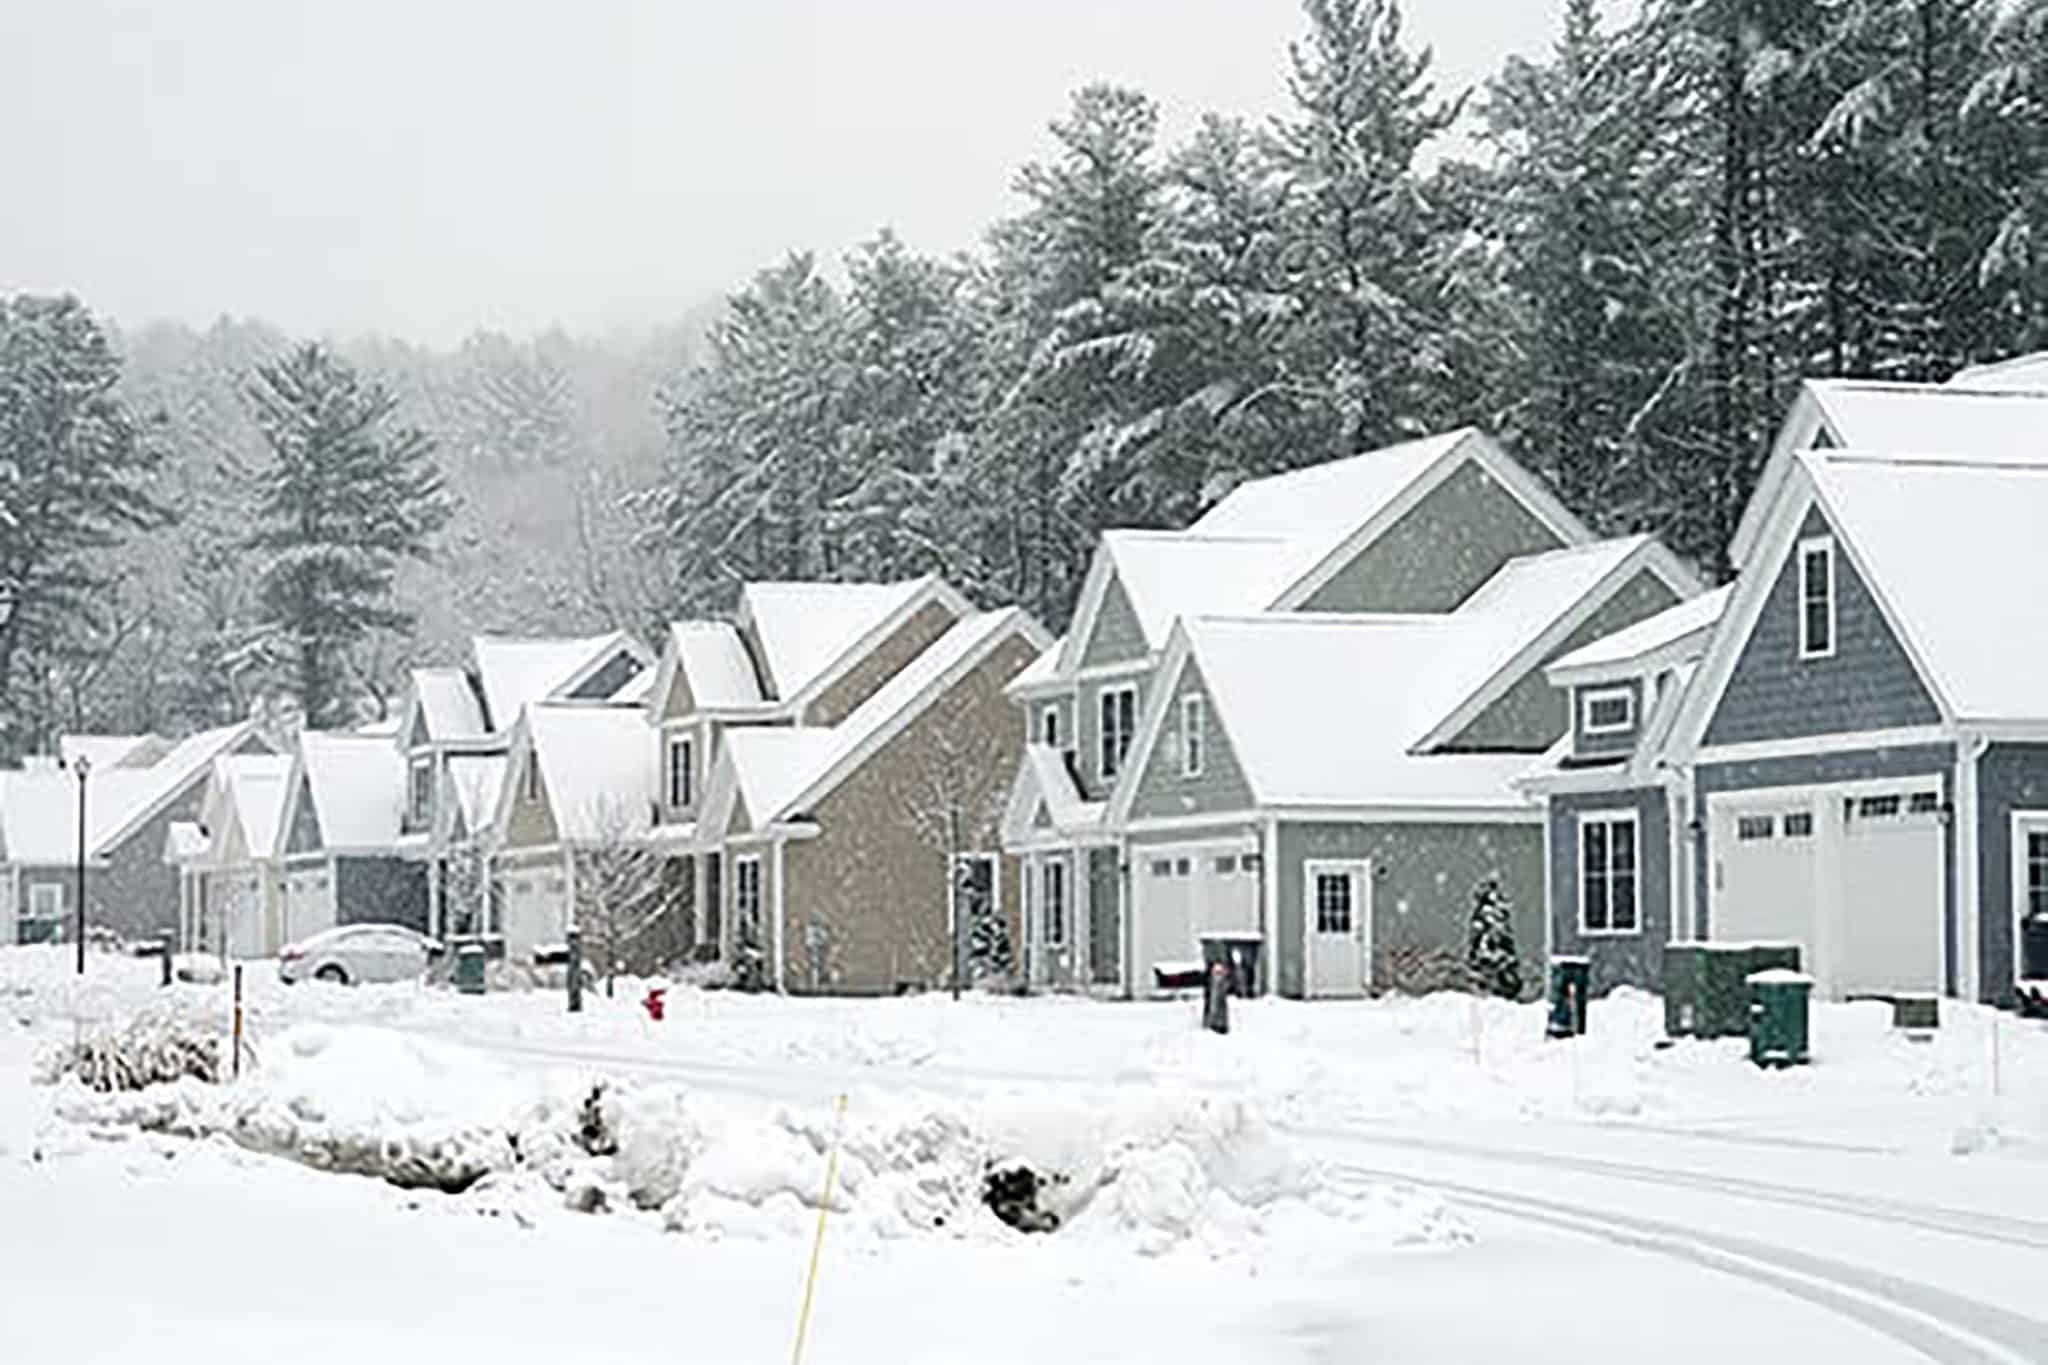 A row of houses covered in snow on a snowy day.